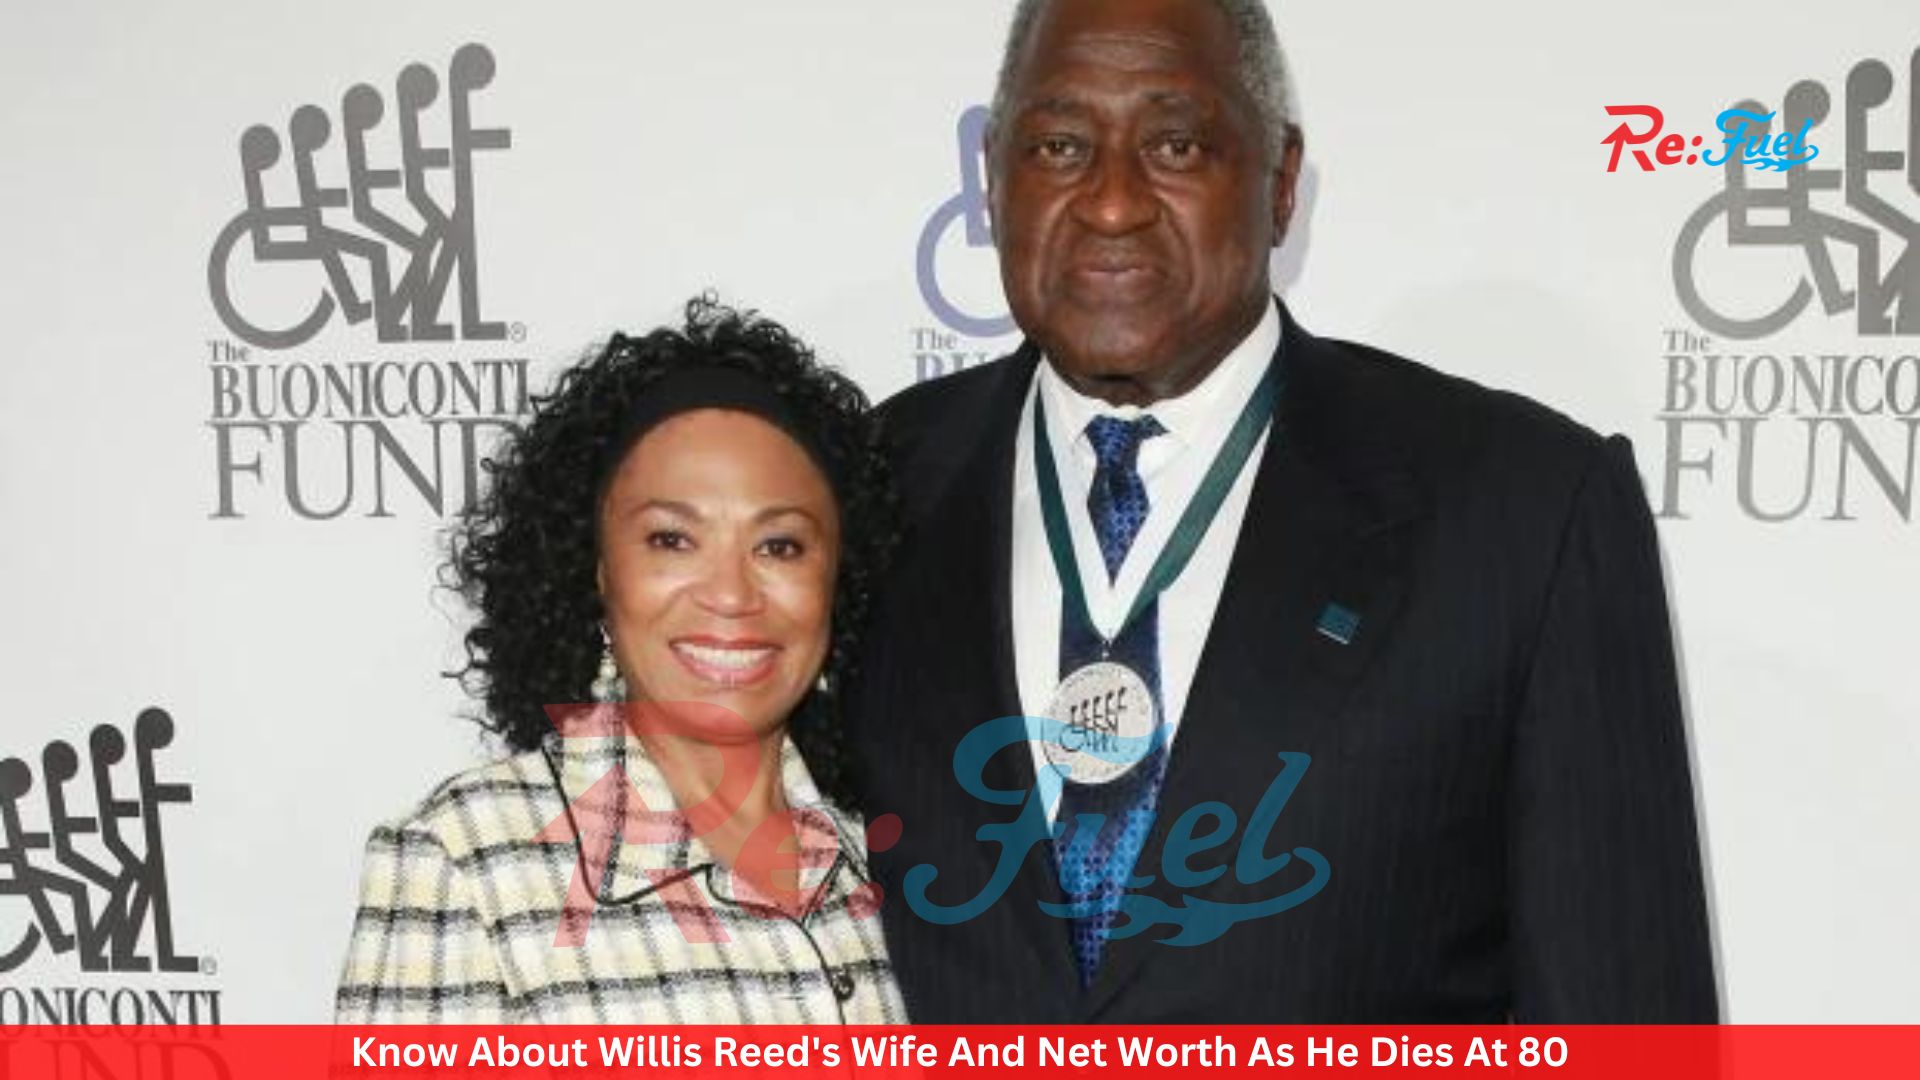 Know About Willis Reed's Wife And Net Worth As He Dies At 80